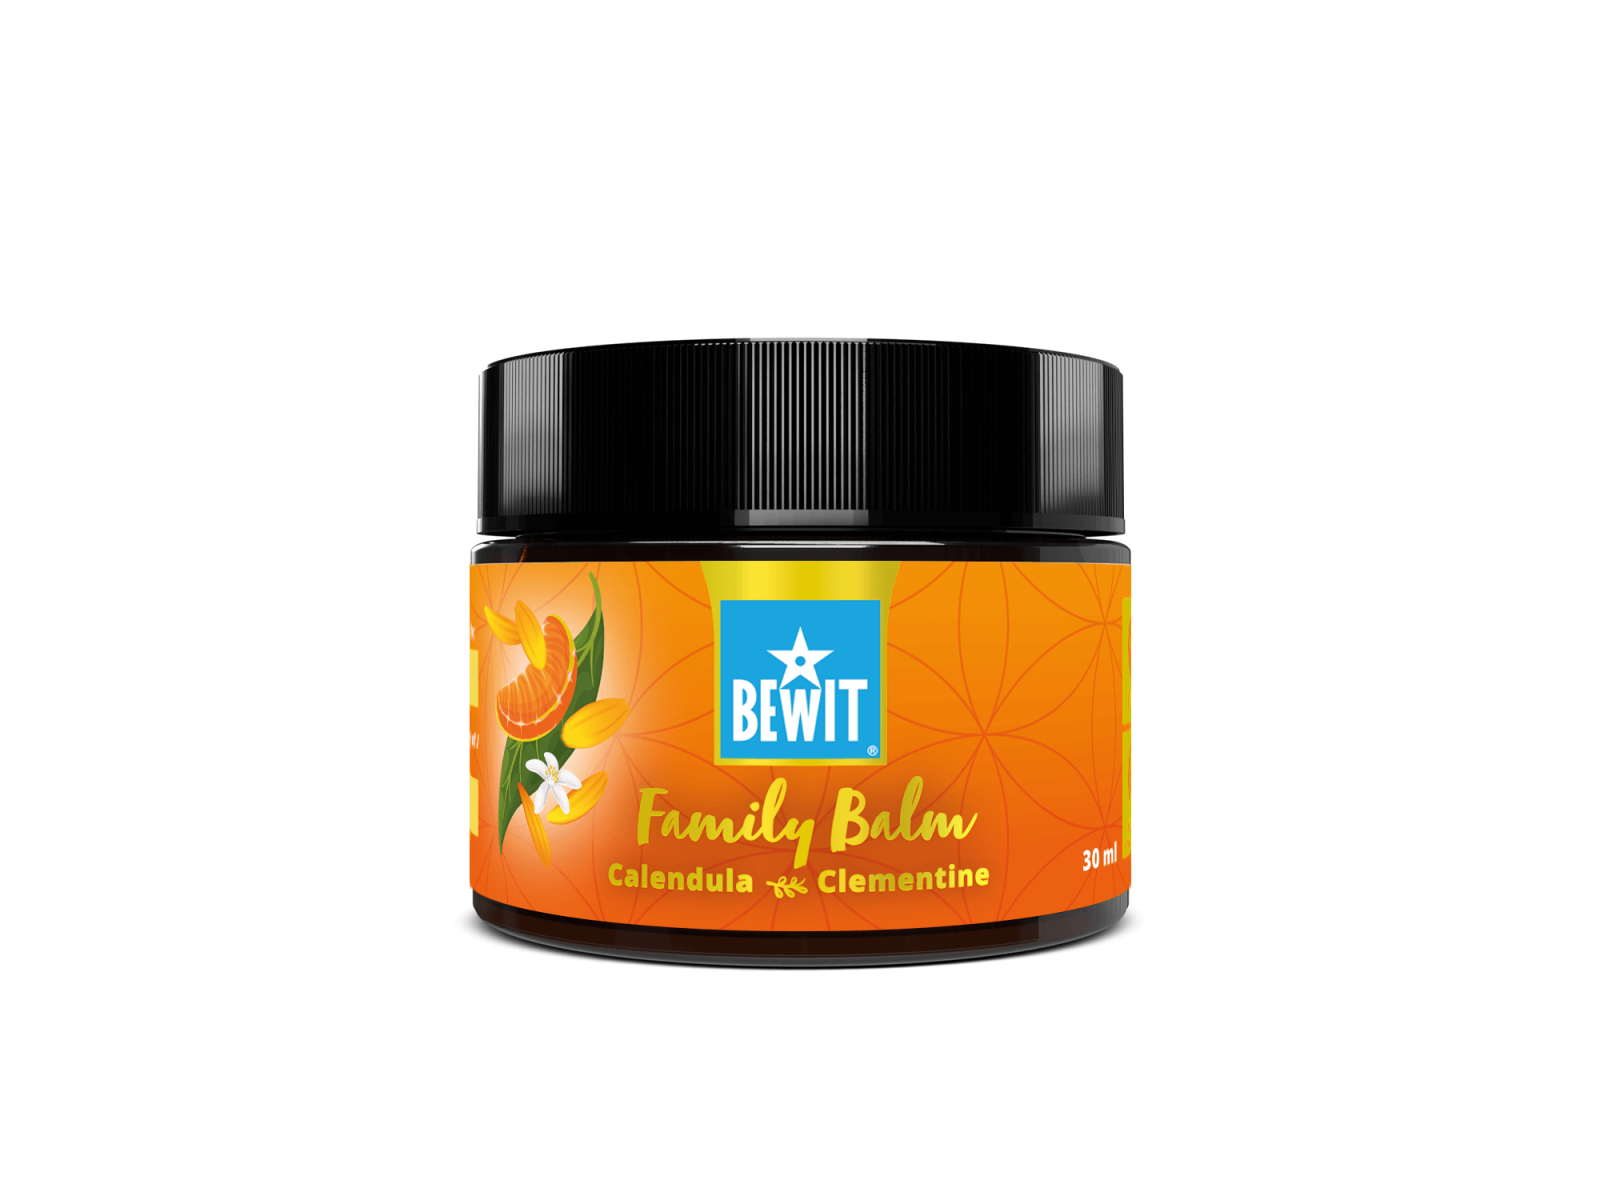 BEWIT FAMILY BALM CALENDULA AND CLEMENTINE - CARING BALM FOR THE WHOLE FAMILY - 5